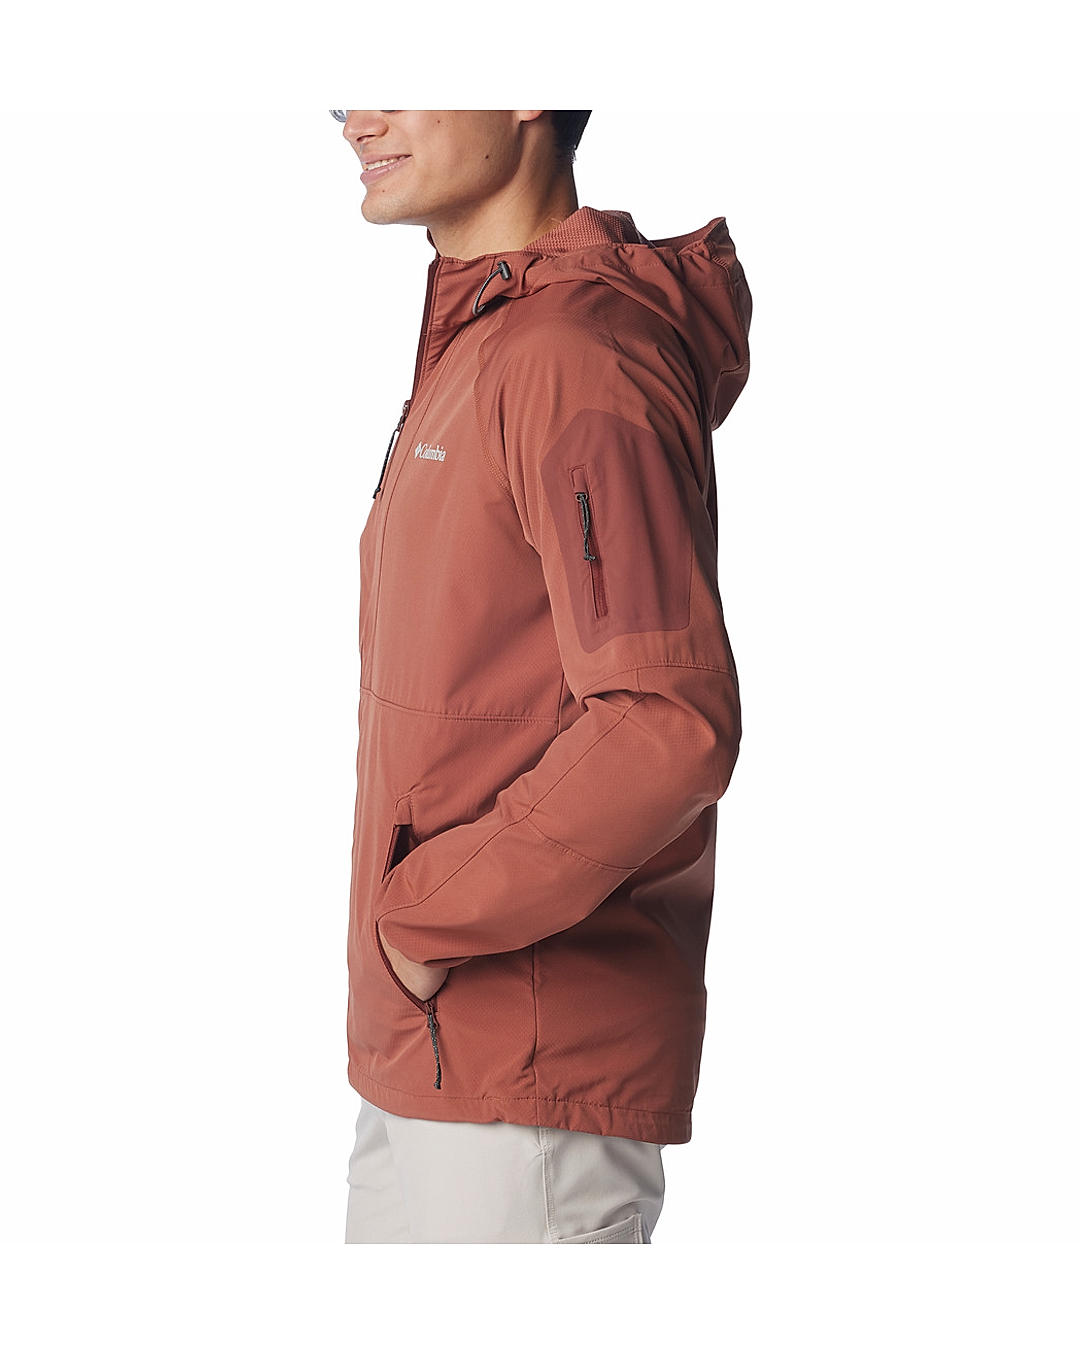 Columbia Men Brown Tall Heights Hooded Softshell